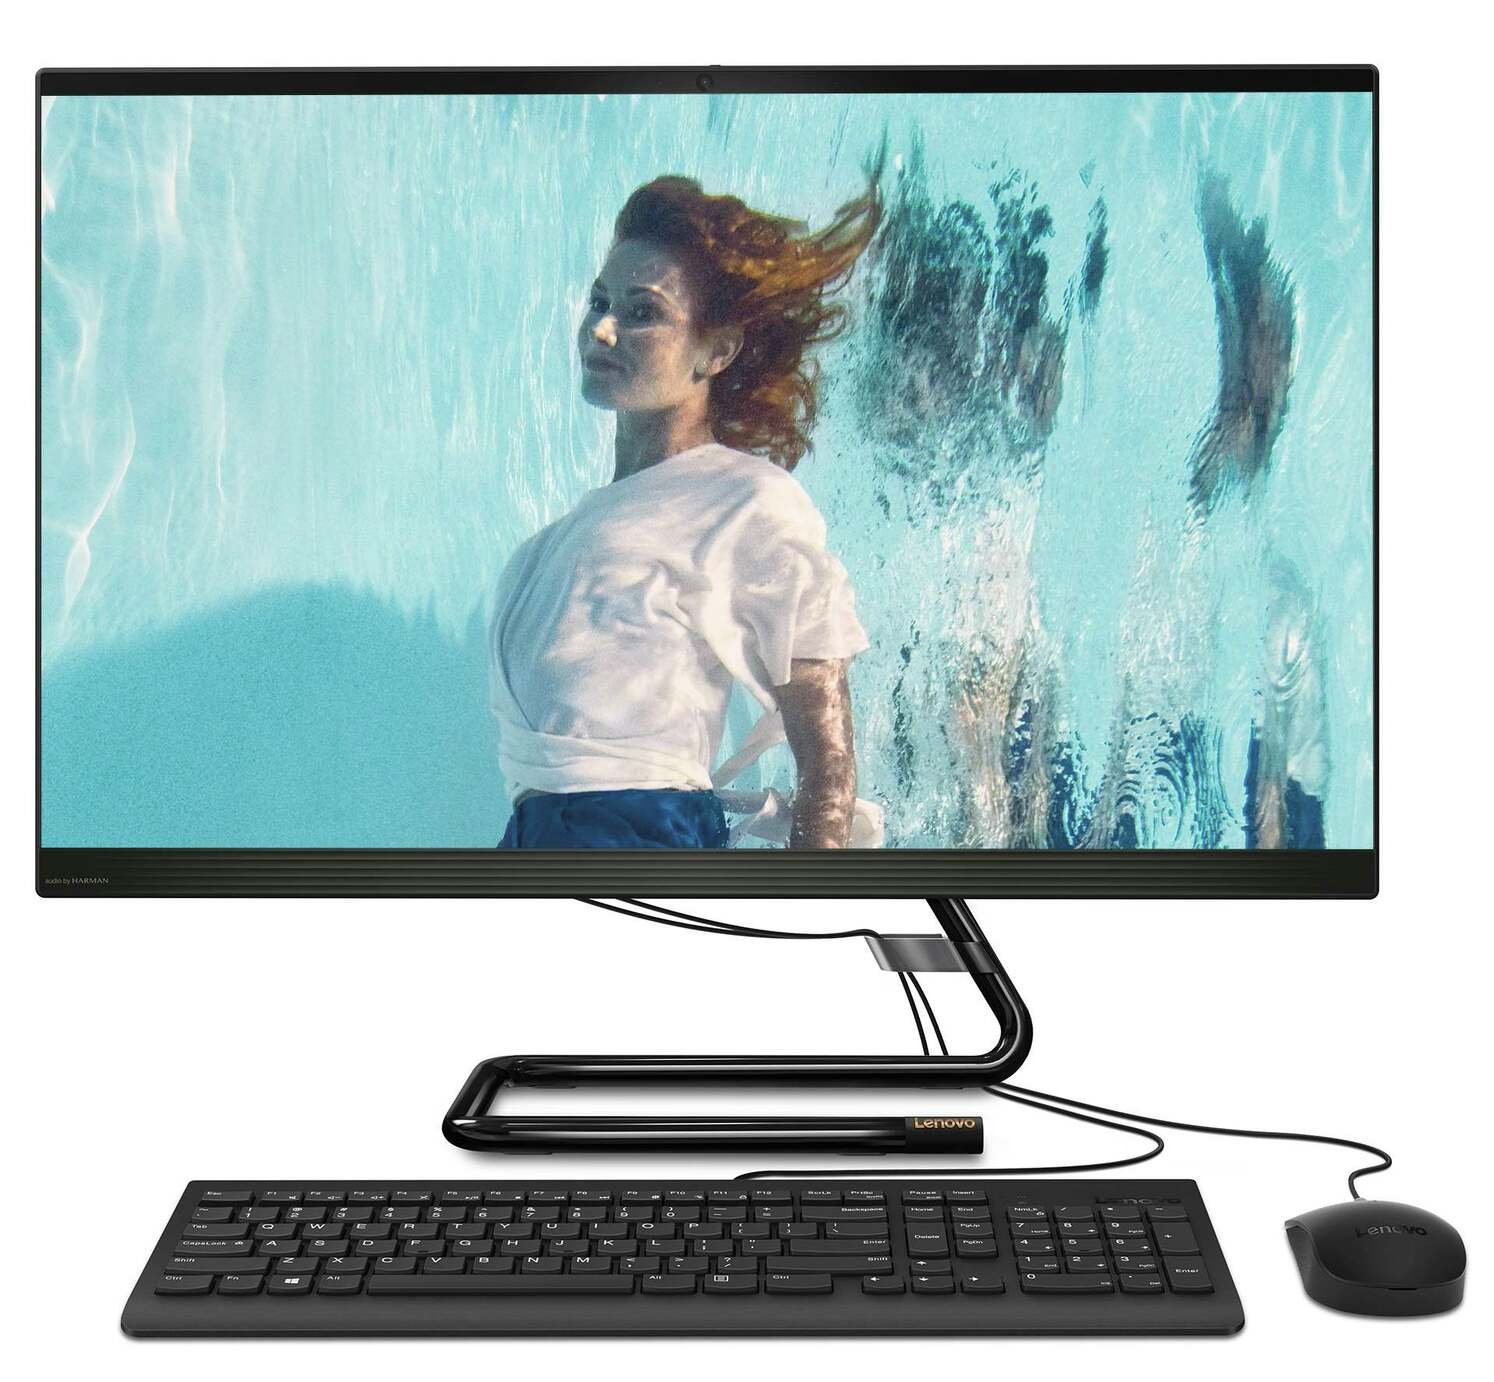 Lenovo IdeaCentre 3i 27in i5 8GB 1TB FHD All-in-One PC Review